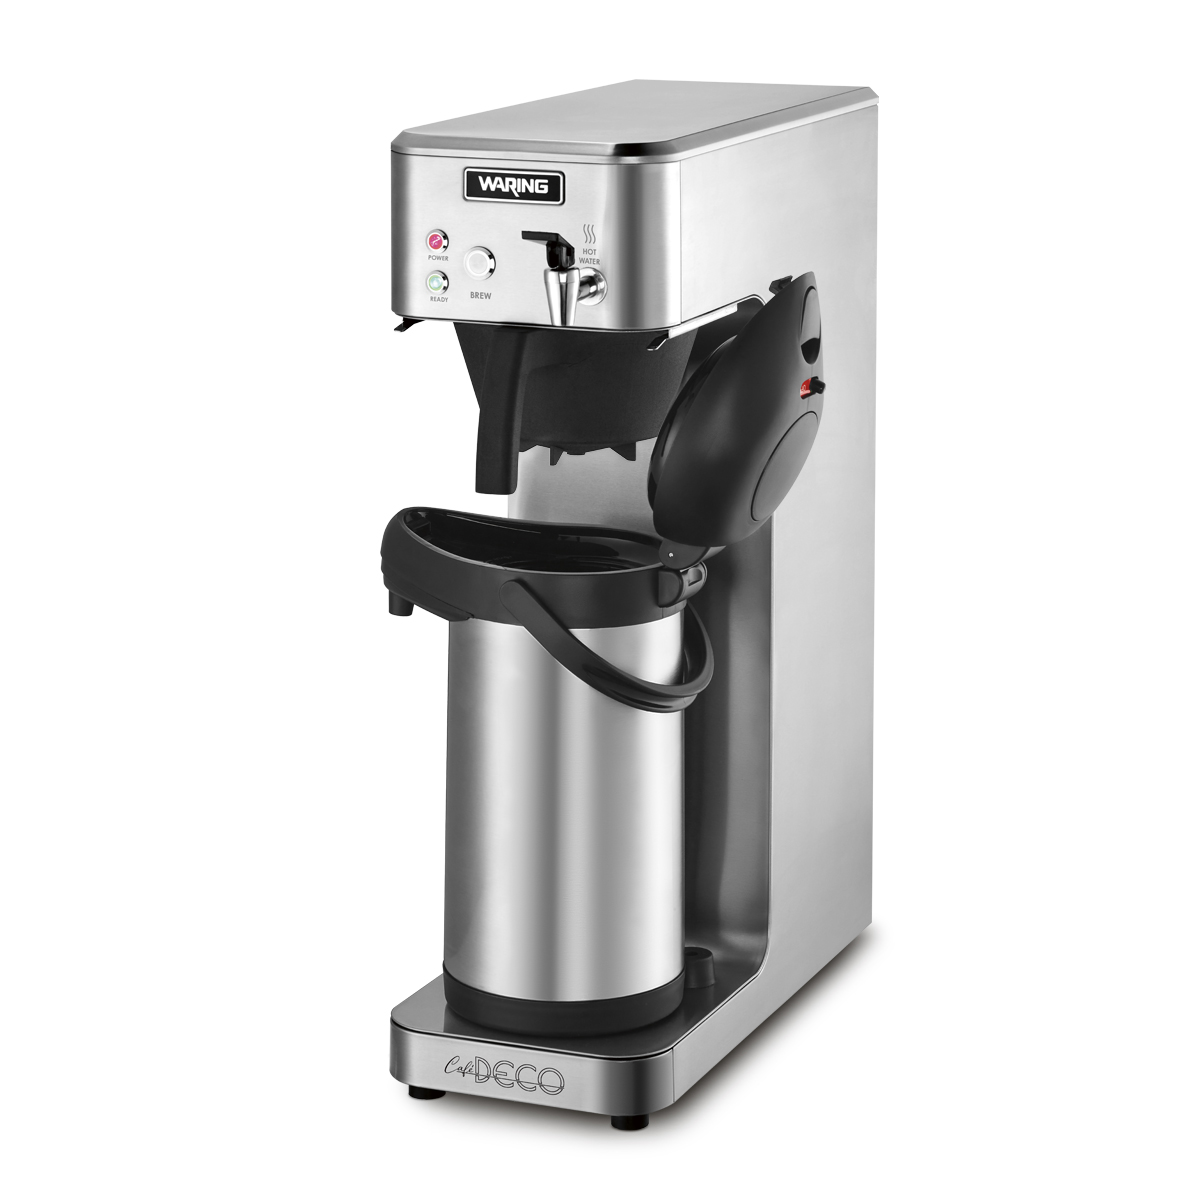 Waring WCM60PT Cafe Deco Thermal Coffee Brewer